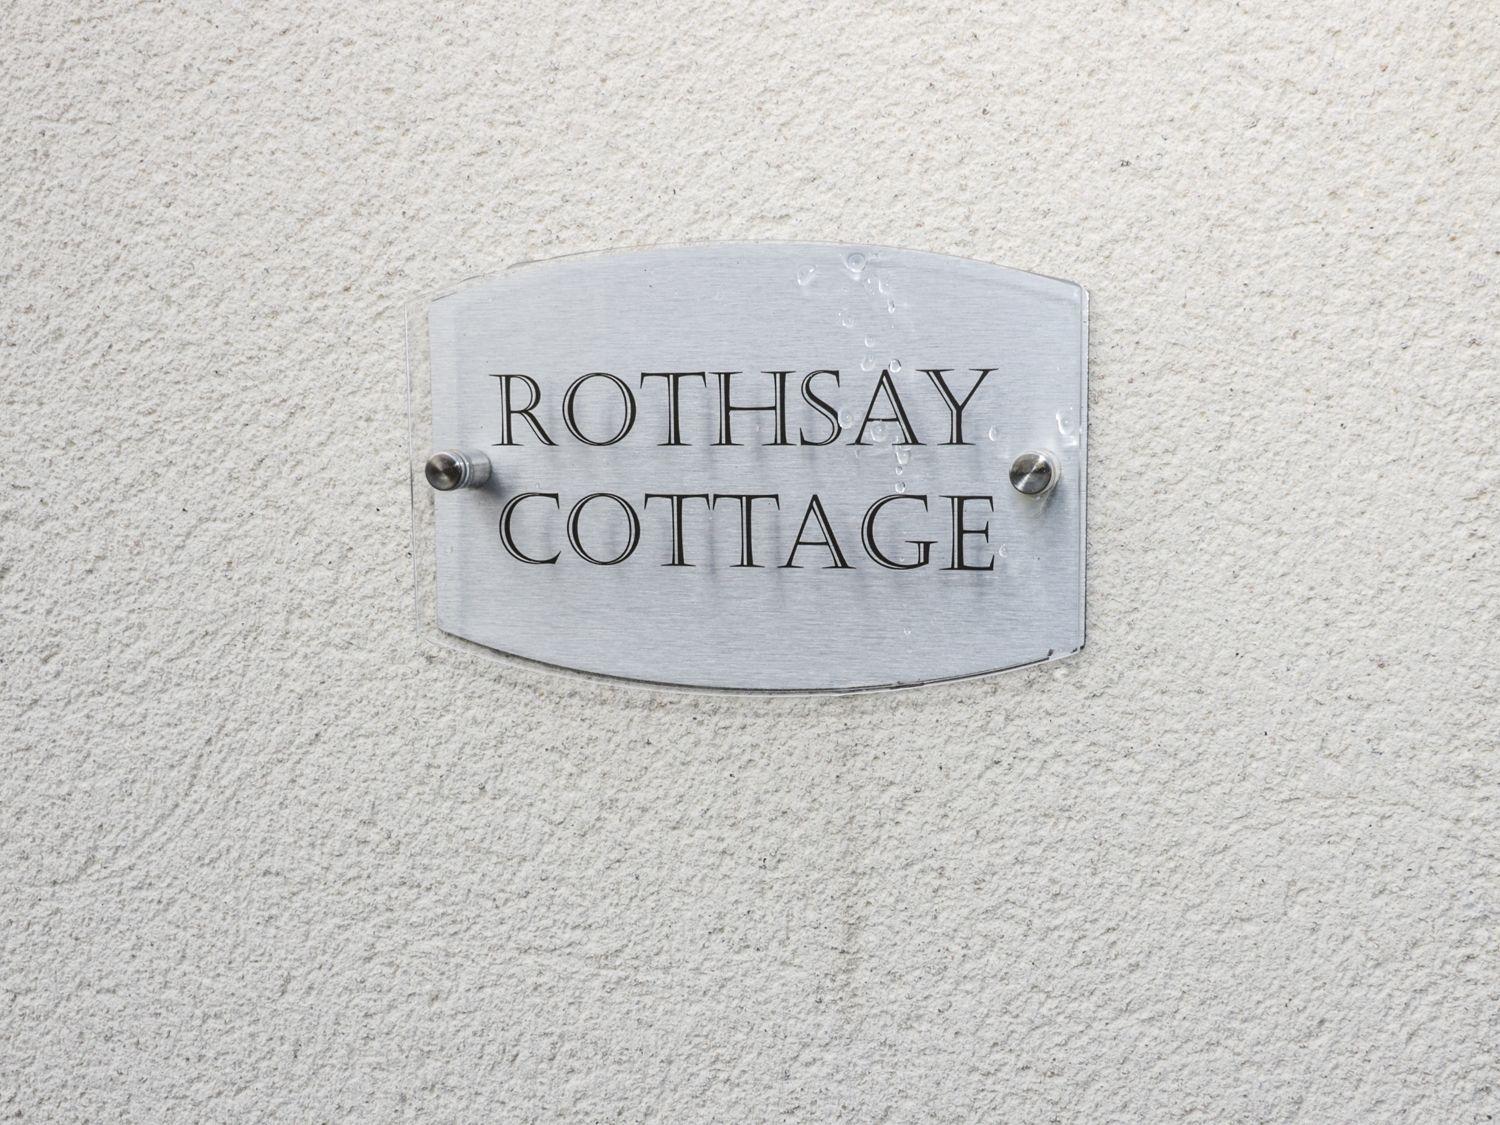 Rothsay Logo - Rothsay Cottage | Newbiggin-by-the-sea | Northumbria | Self Catering ...